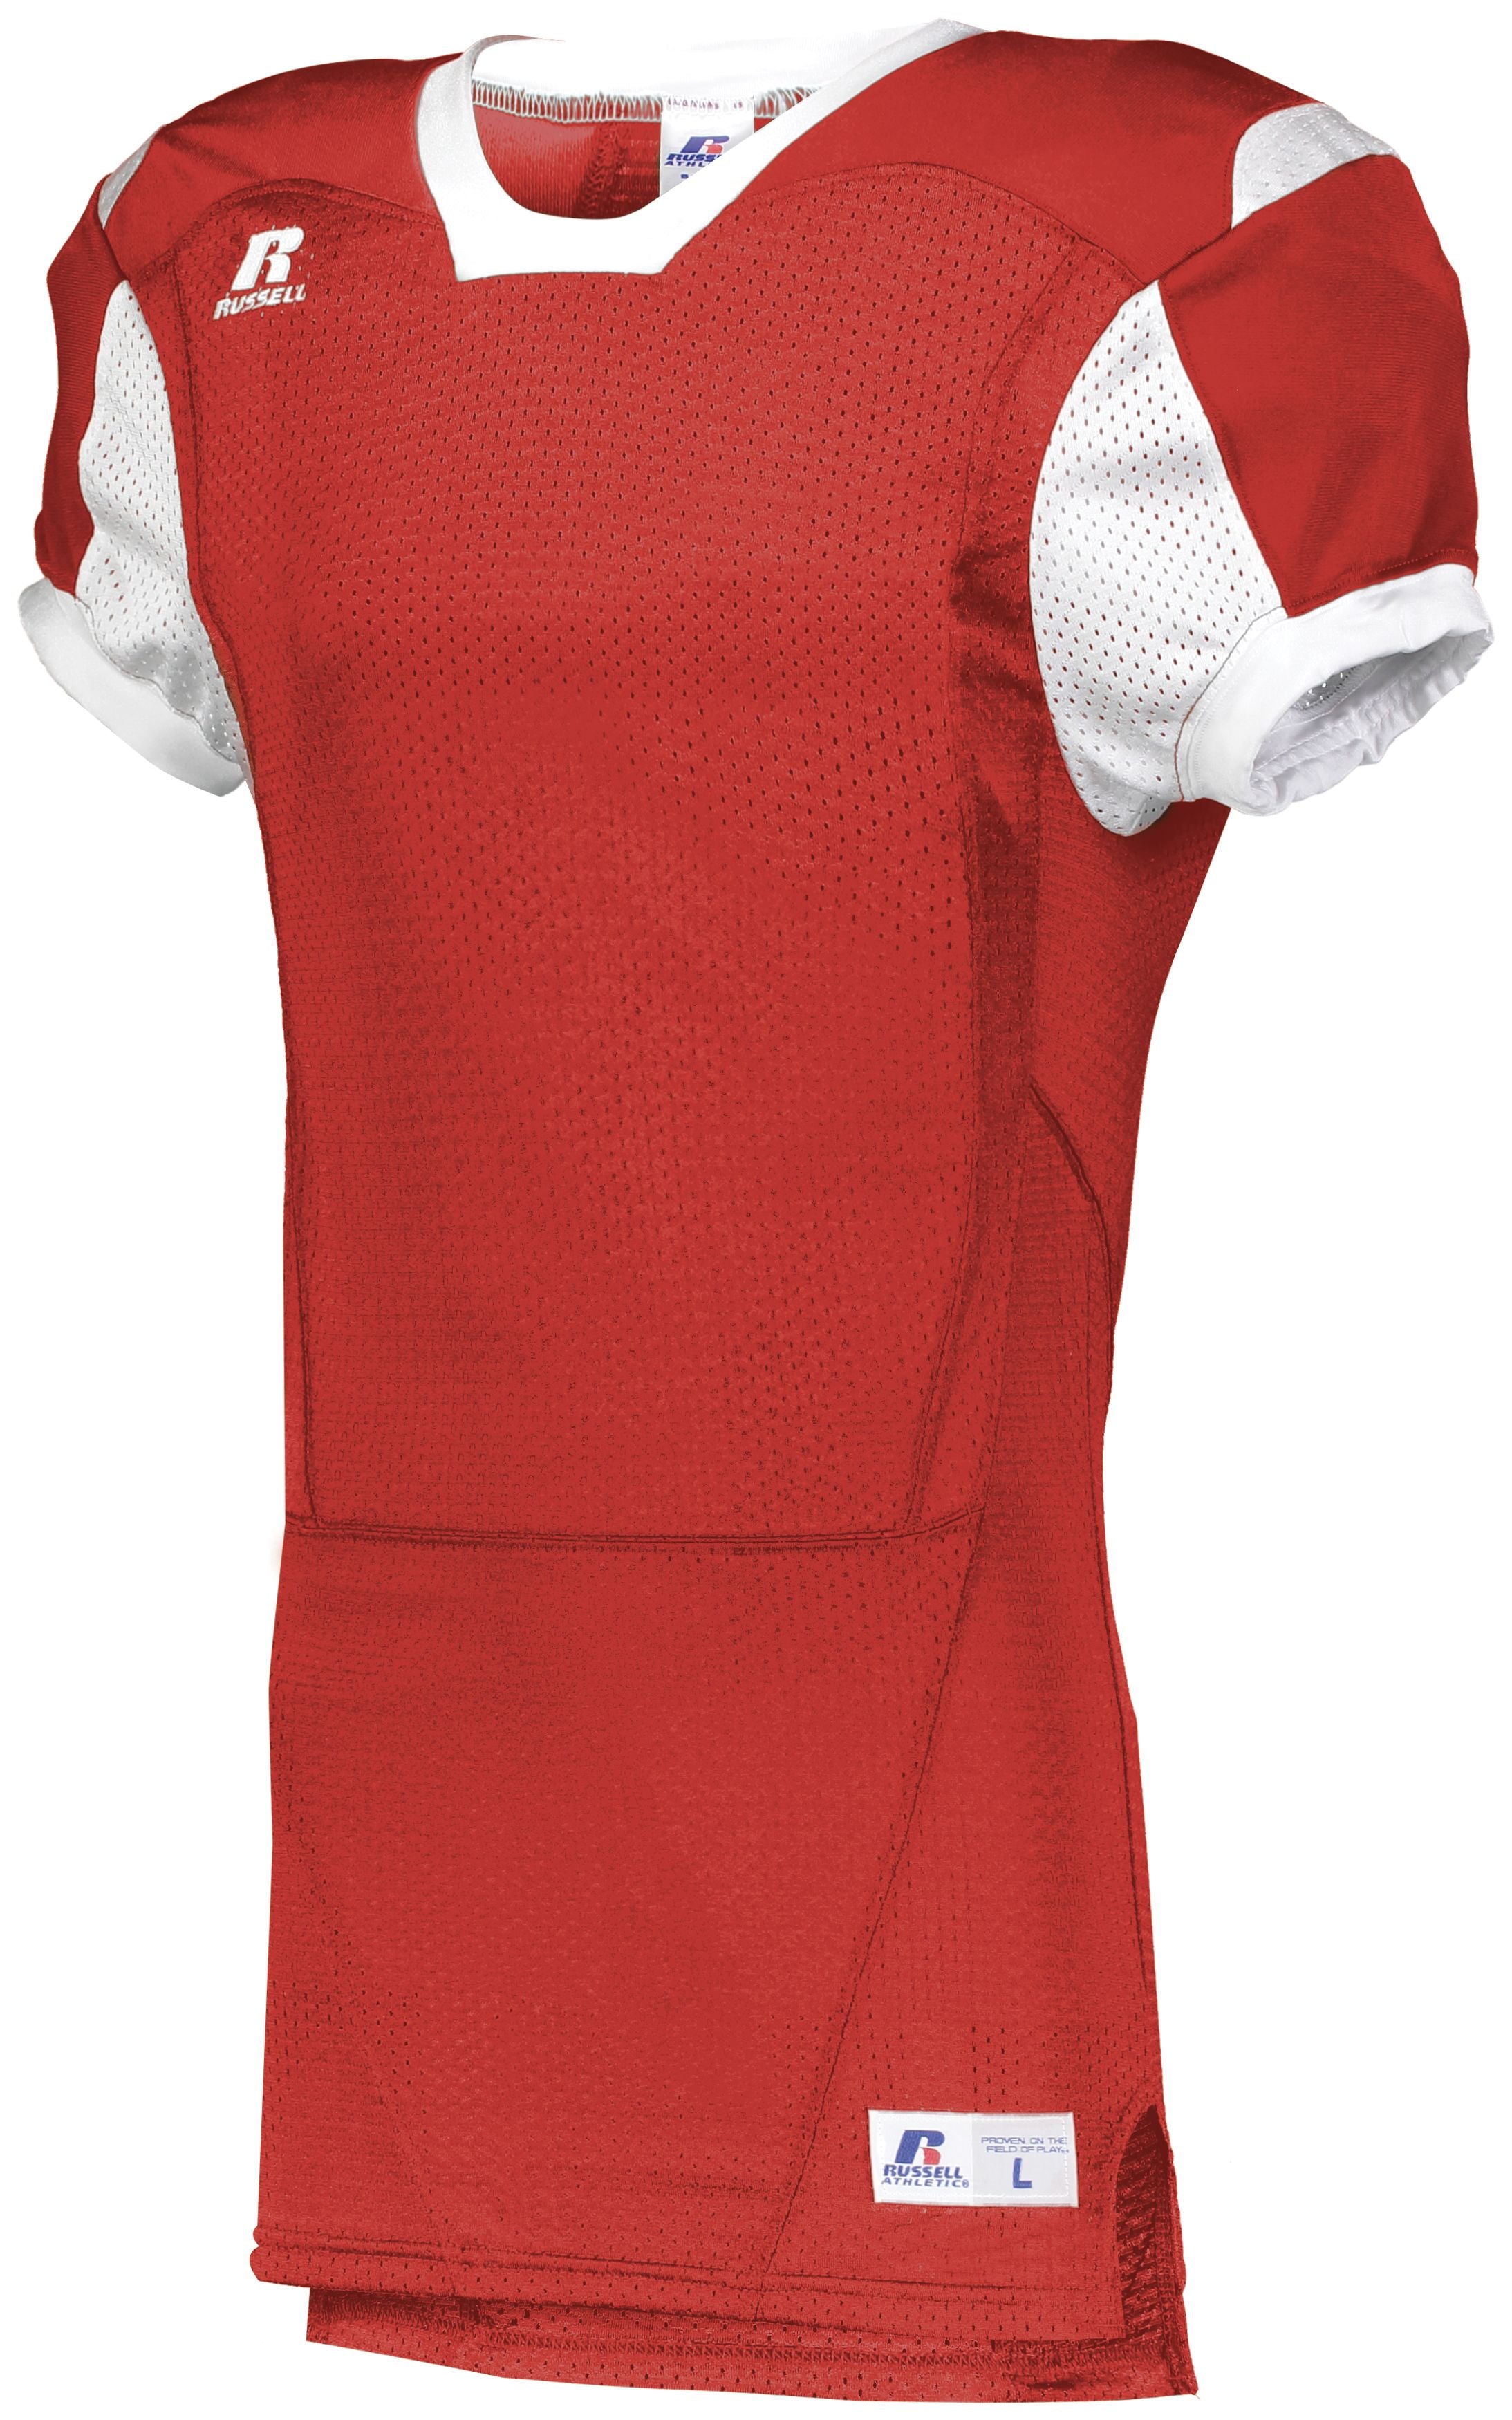 Russell Athletic Youth Color Block Game Jersey in True Red/White  -Part of the Youth, Youth-Jersey, Football, Russell-Athletic-Products, Shirts, All-Sports, All-Sports-1 product lines at KanaleyCreations.com